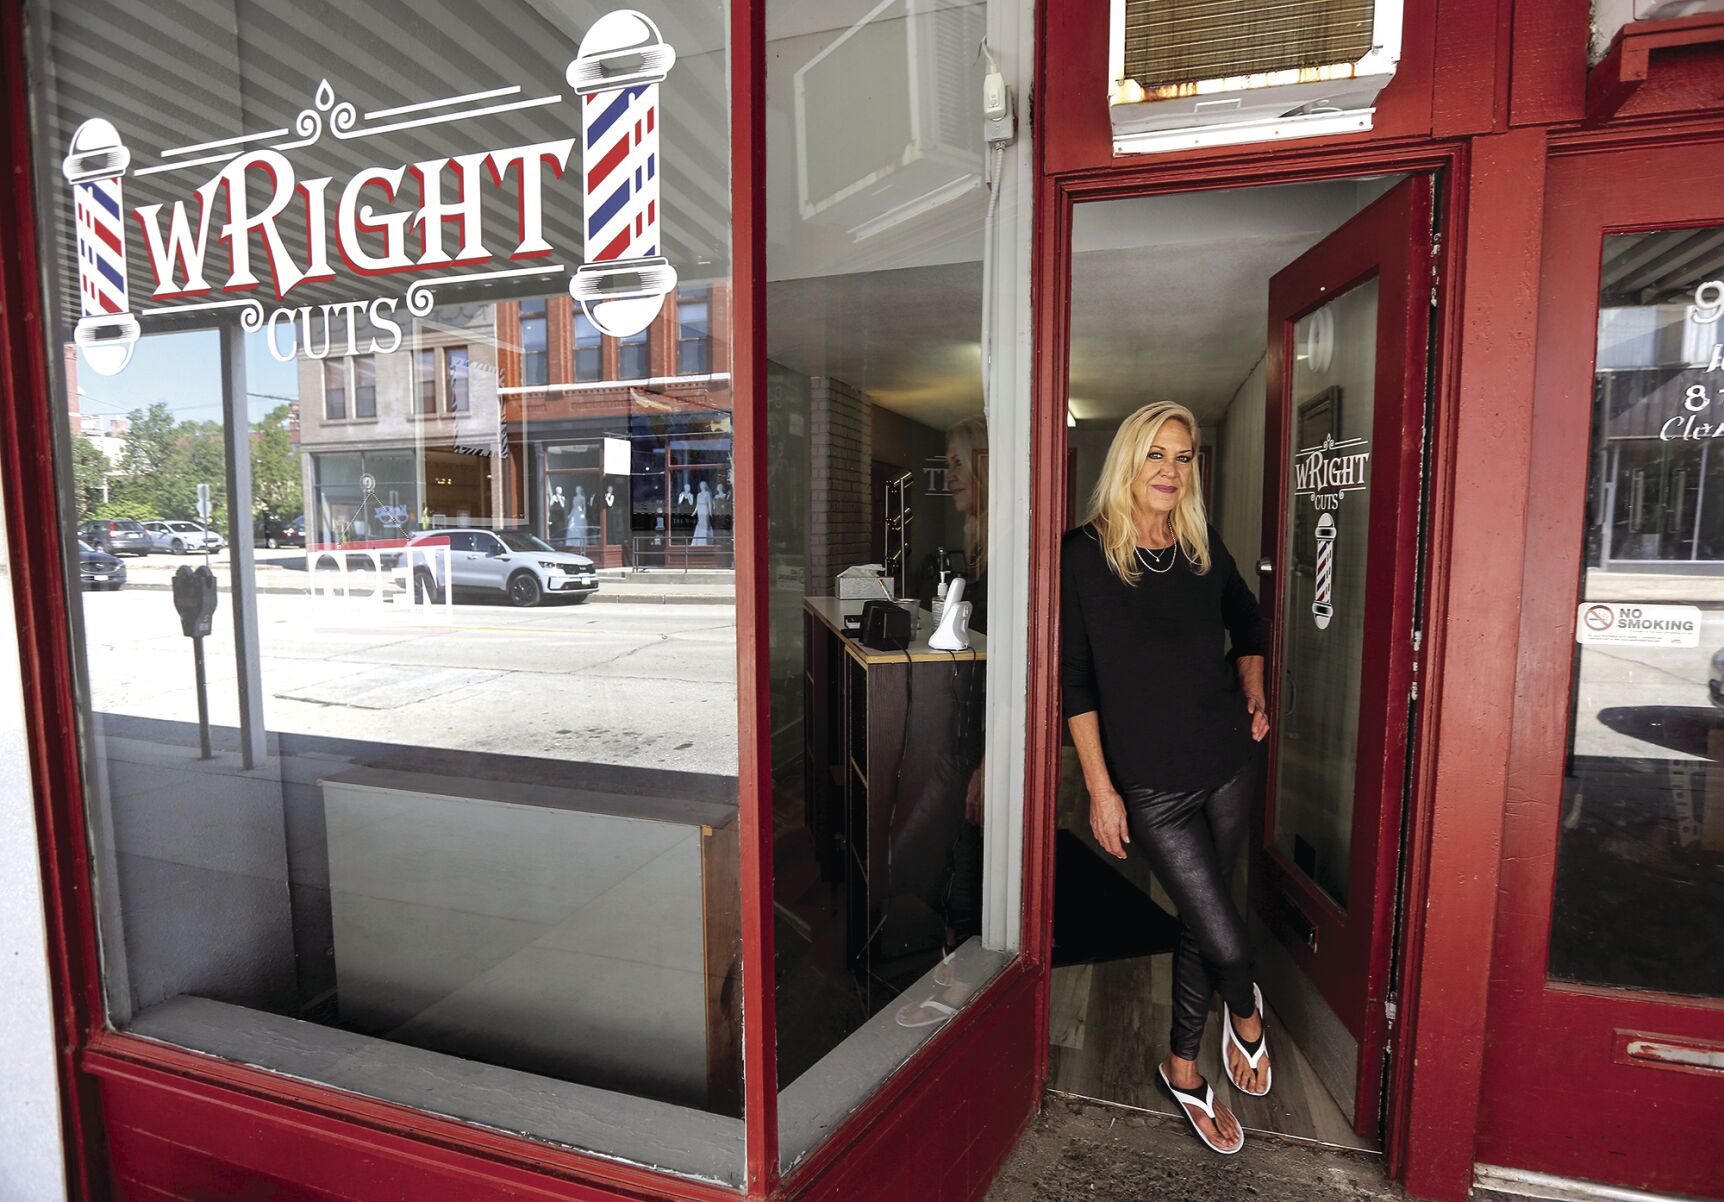 Nancy Wright is the owner of Wright Cuts, located on Main Street in Dubuque.    PHOTO CREDIT: Dave Kettering